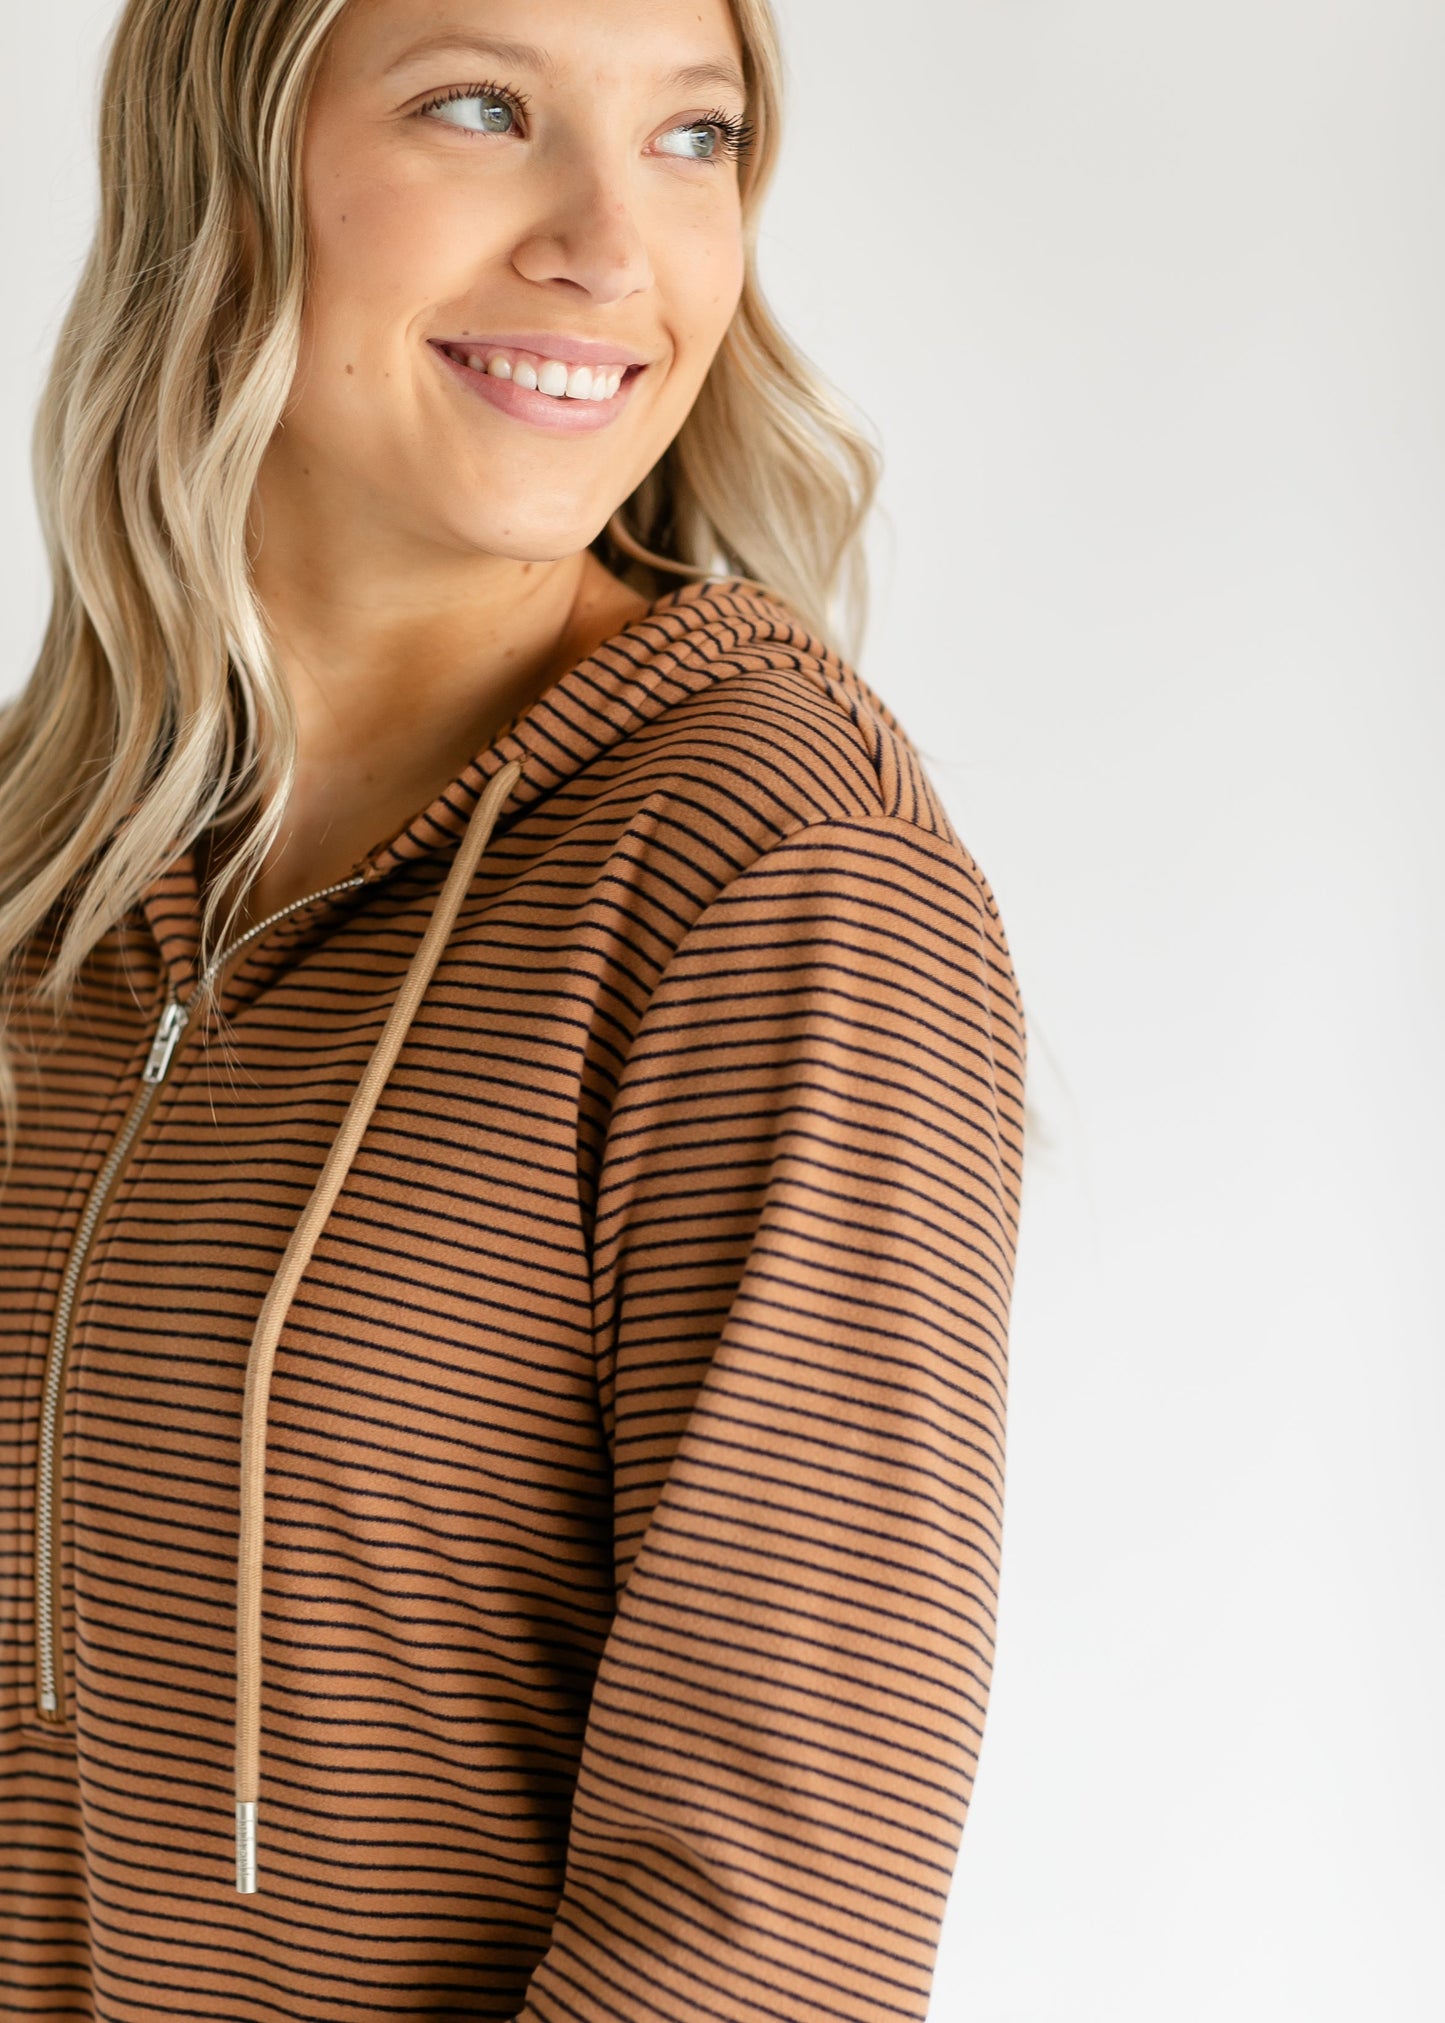 Cayla Striped Light Weight Hooded IC Dresses